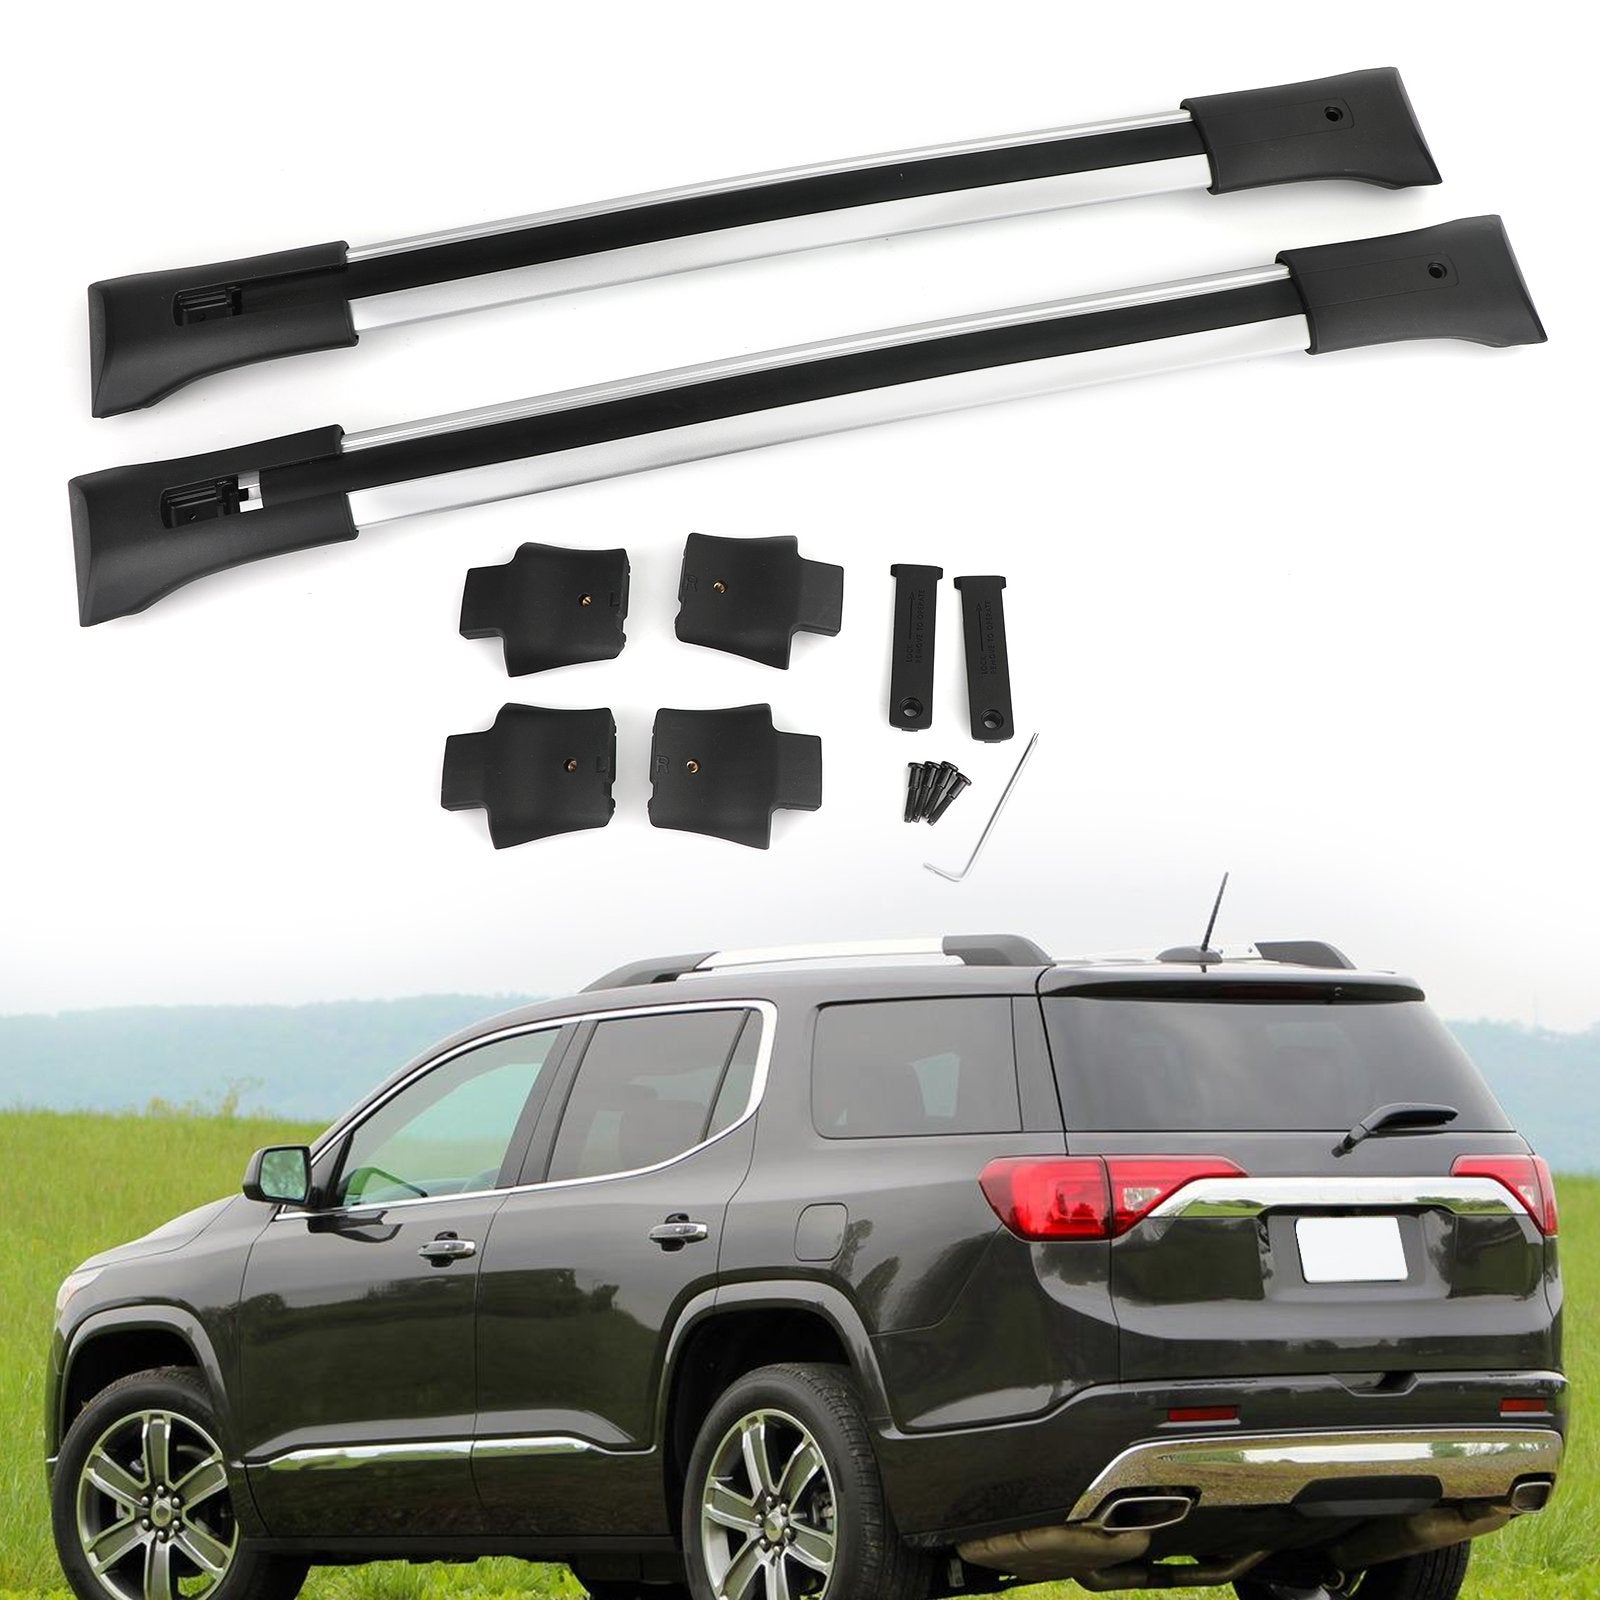 Roof Rack Cross Rail Package Silver 84130842 Fits For GMC Acadia GM